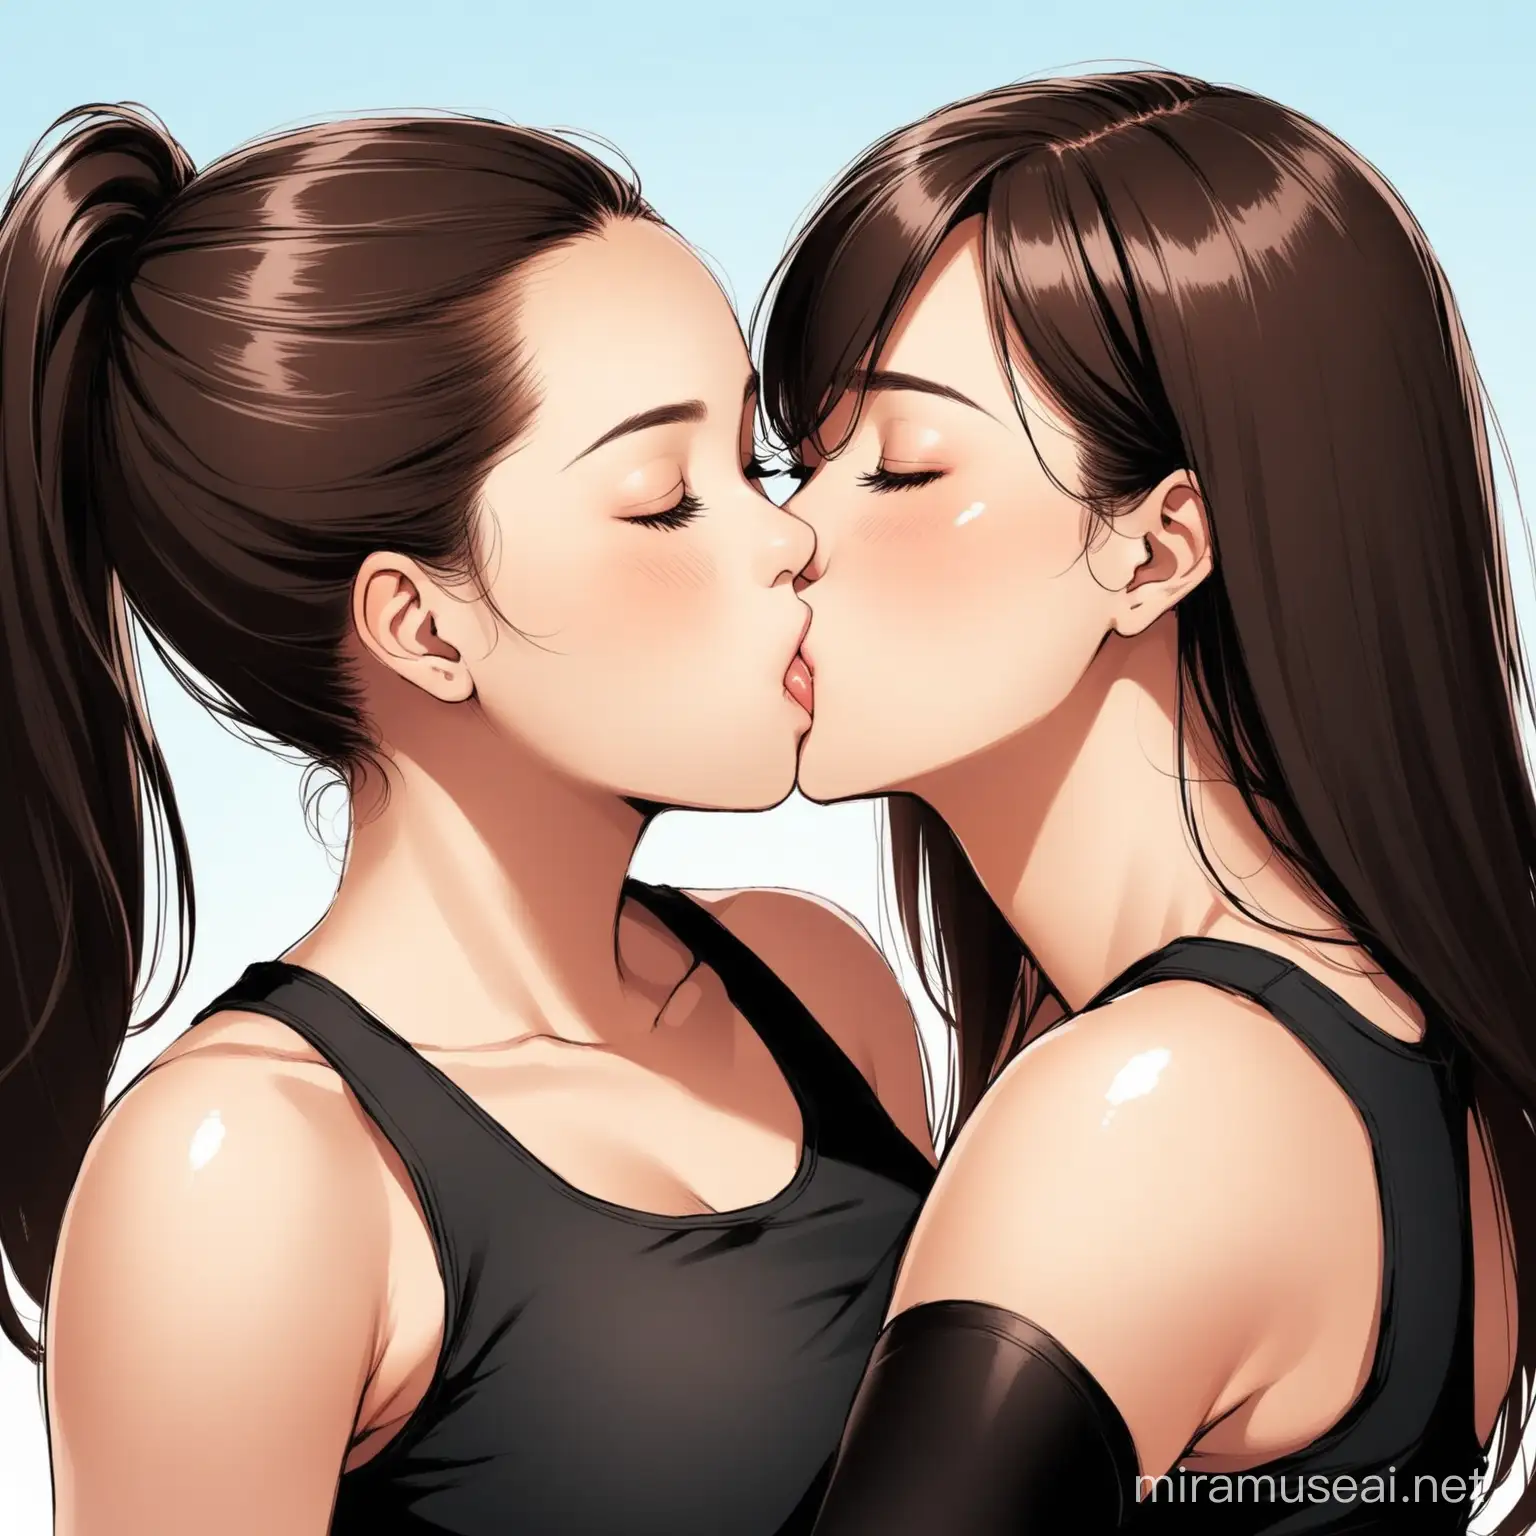 Affectionate Women Embracing in Black Athletic Tank Tops